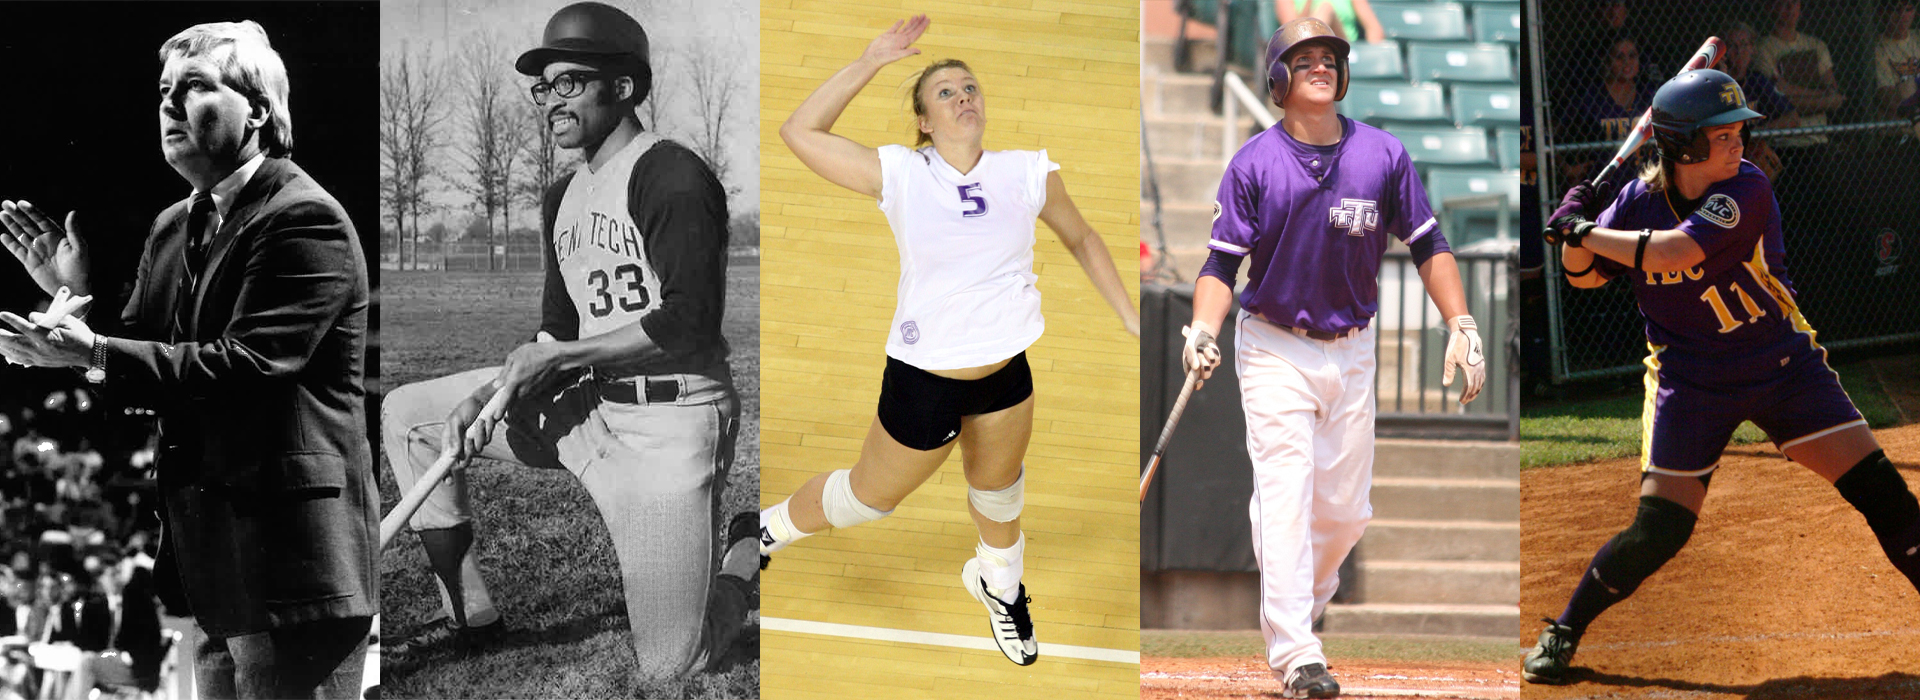 Tennessee Tech Sports Hall of Fame announces five inductees for Class of 2021